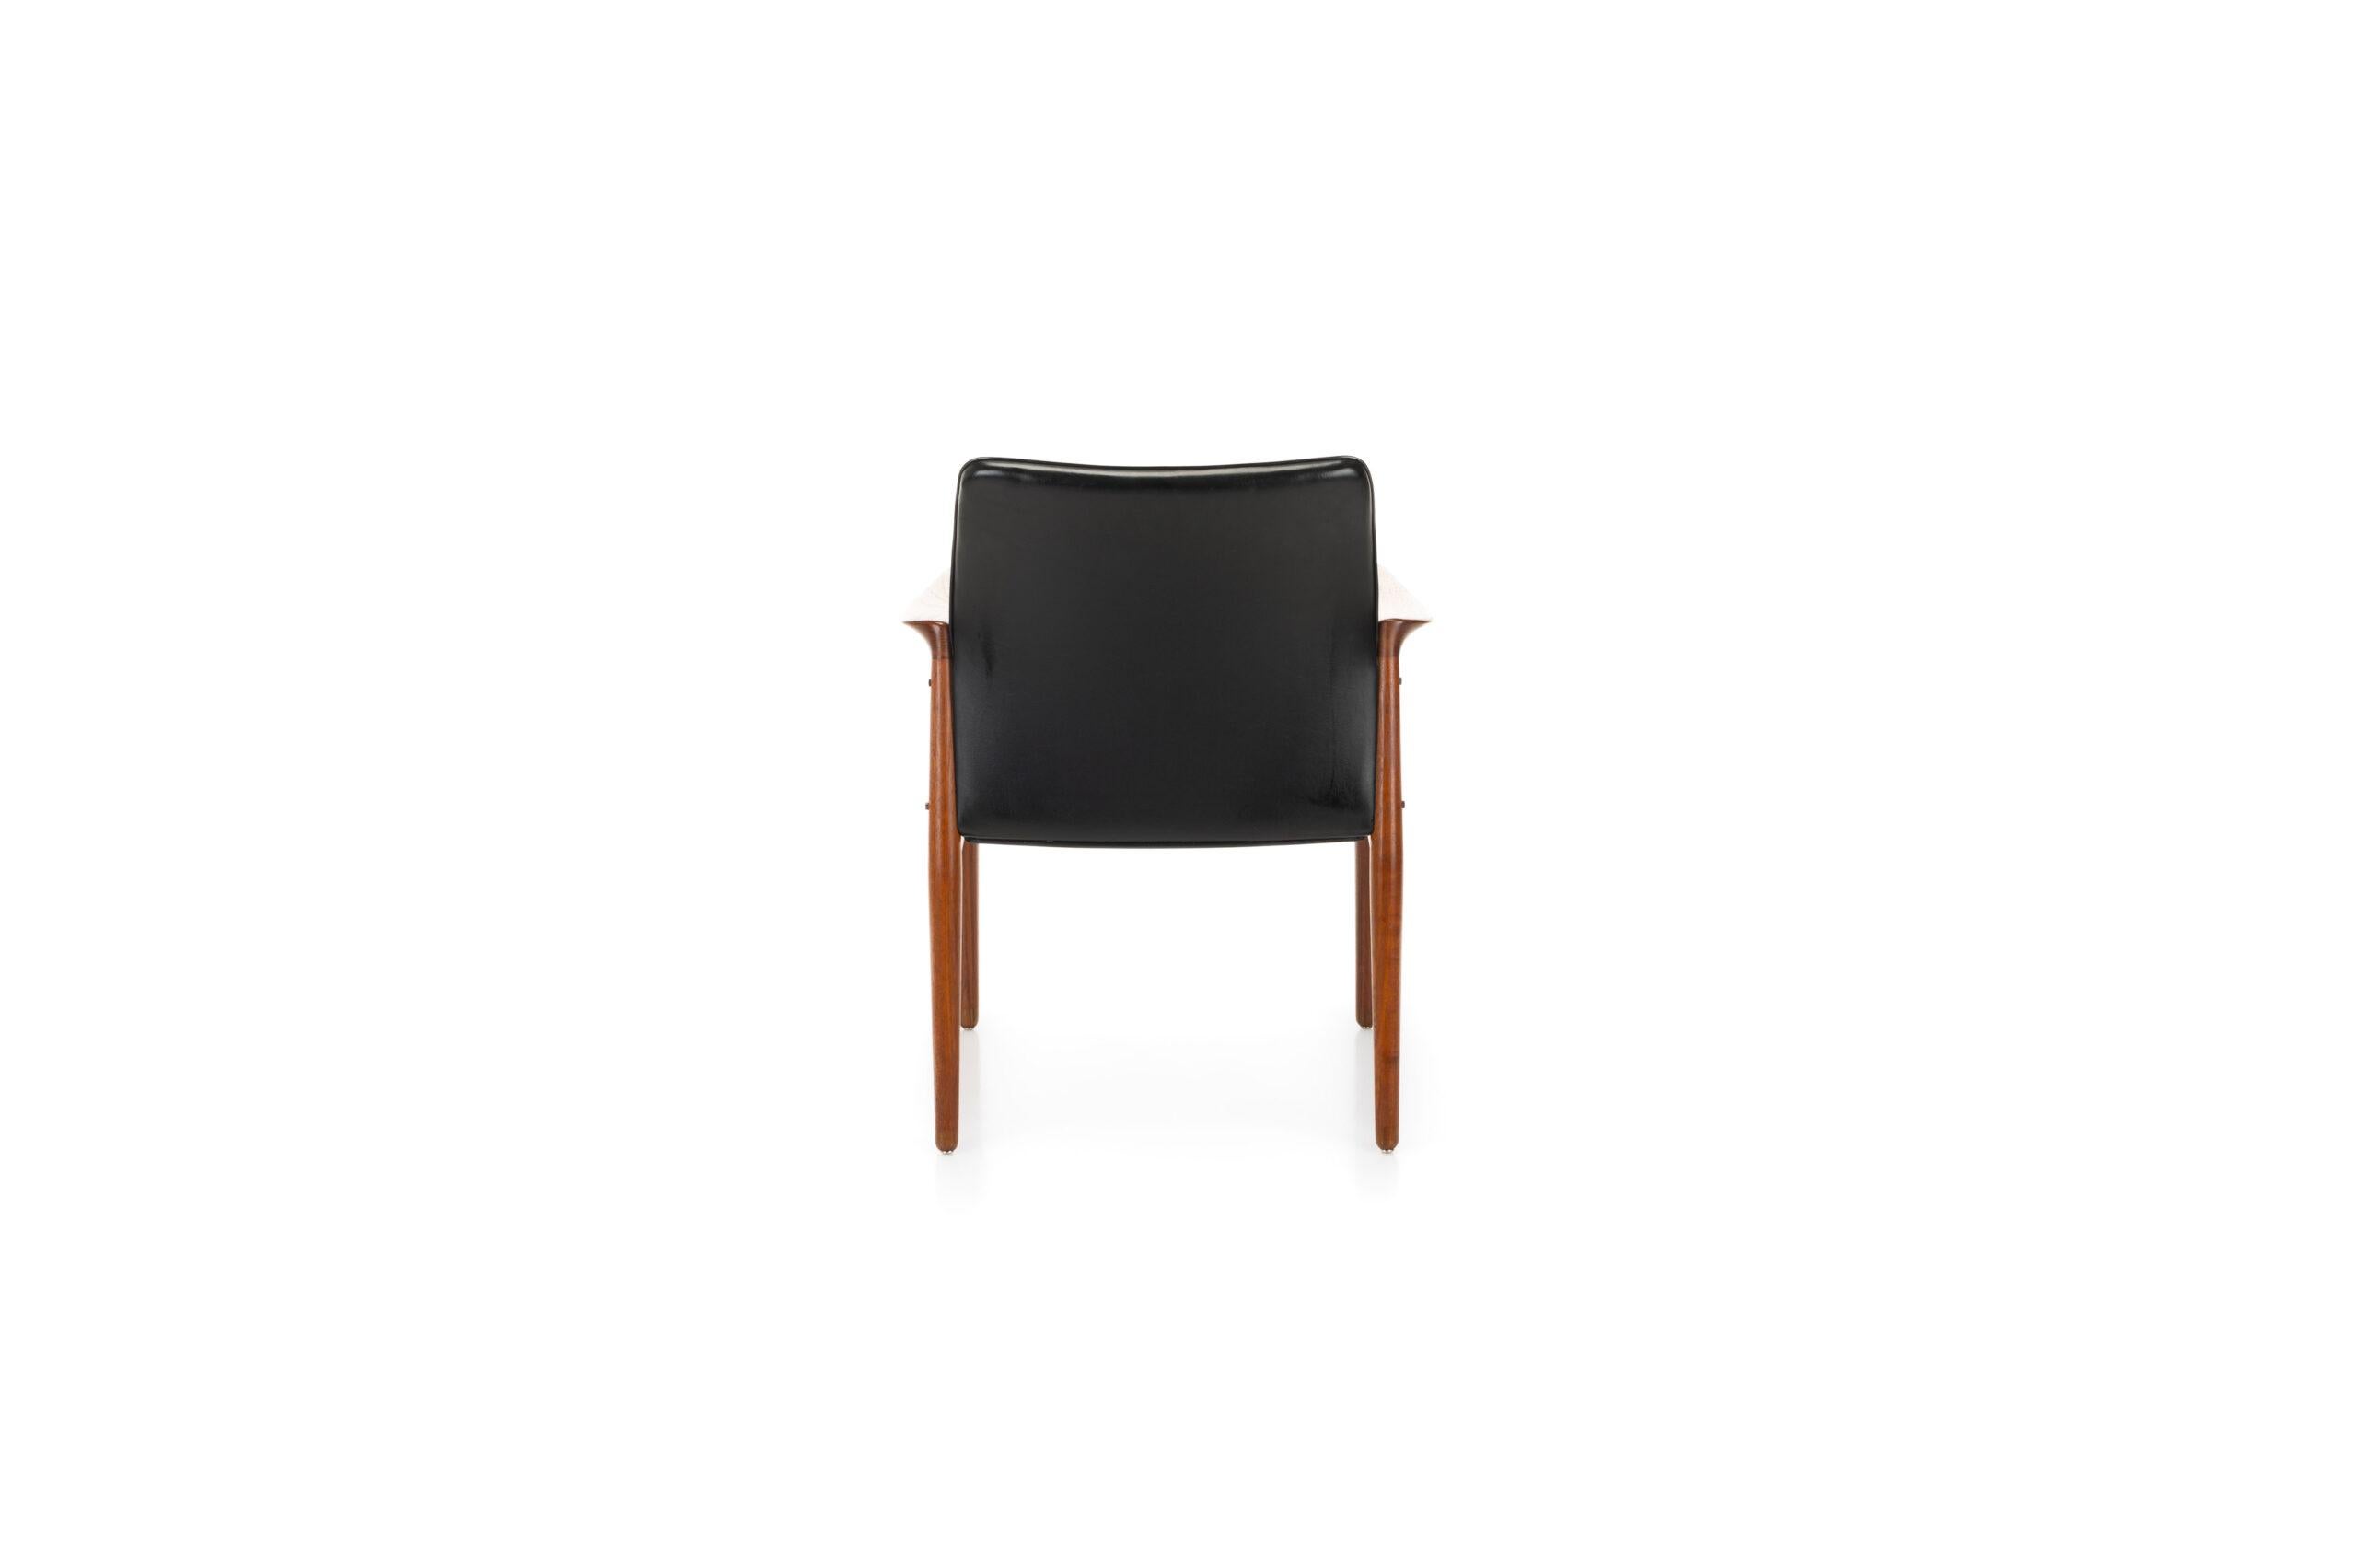 Mid-20th Century Danish Armchair by Grete Jalk for Glostrup, Denmark 1960s For Sale